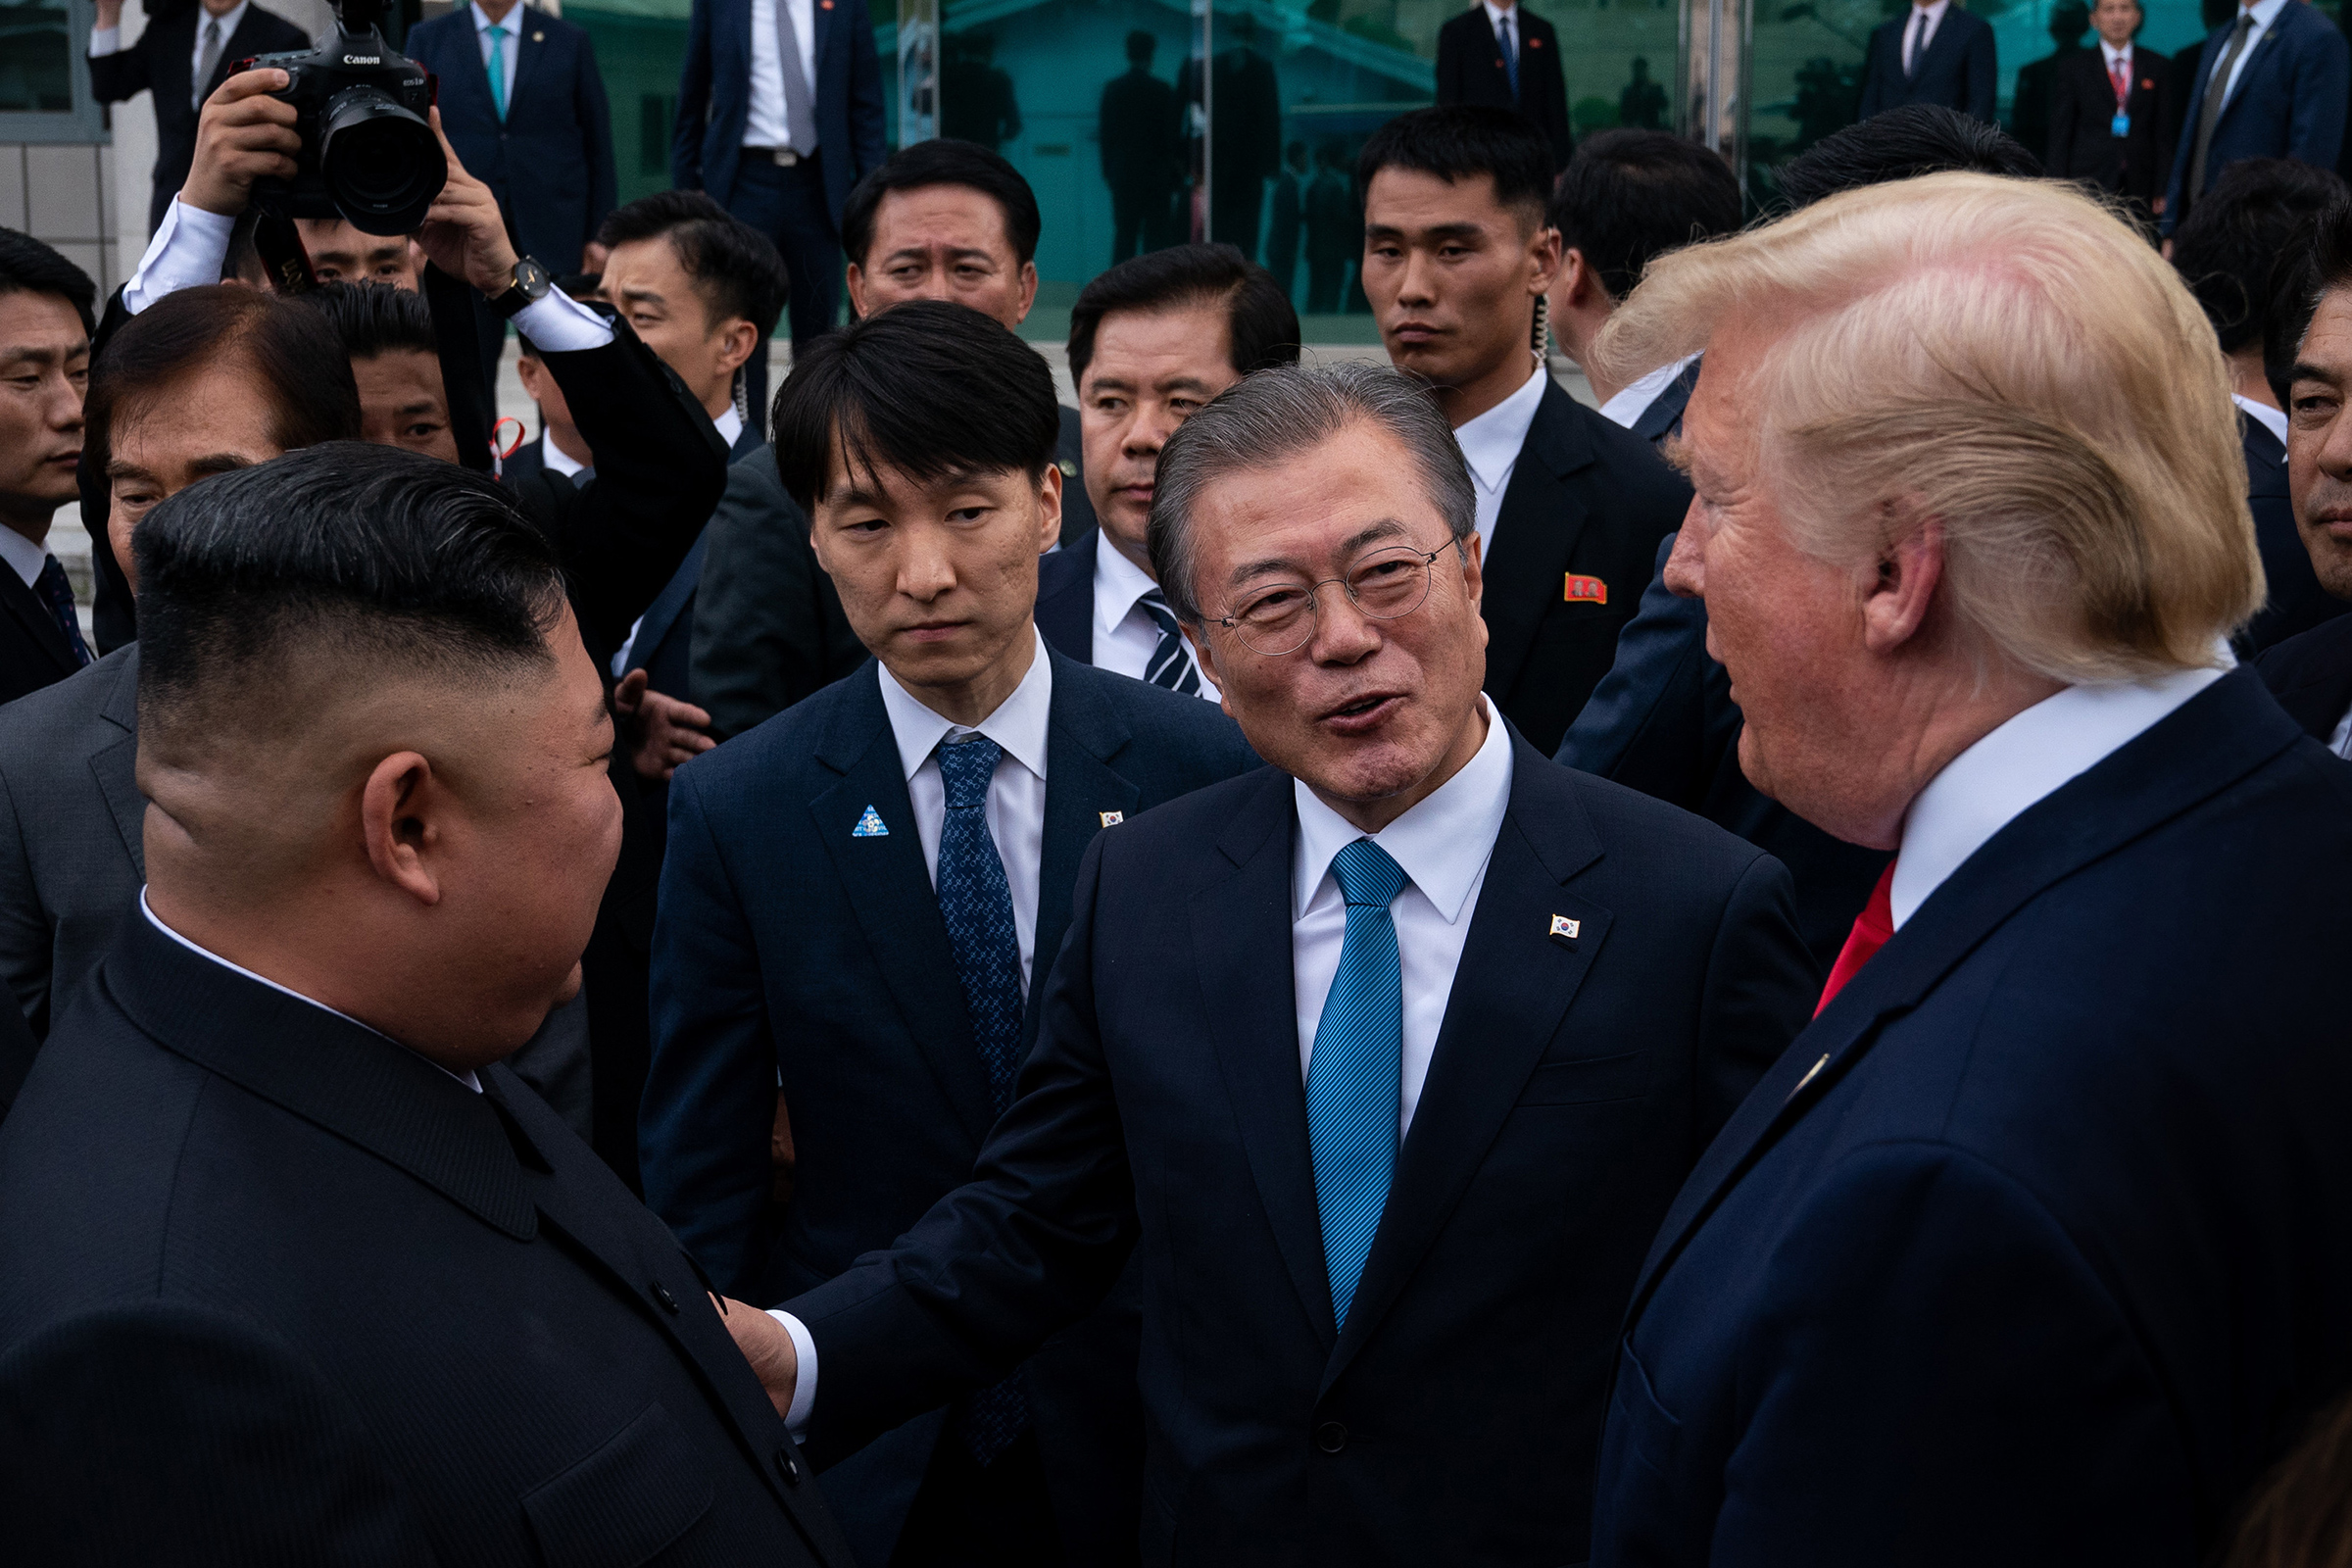 President Donald Trump, President Moon Jae-in, and Kim Jong Un speak outside the Freedom House on the South Korean side of the truce village of Panmunjom, June 30, 2019